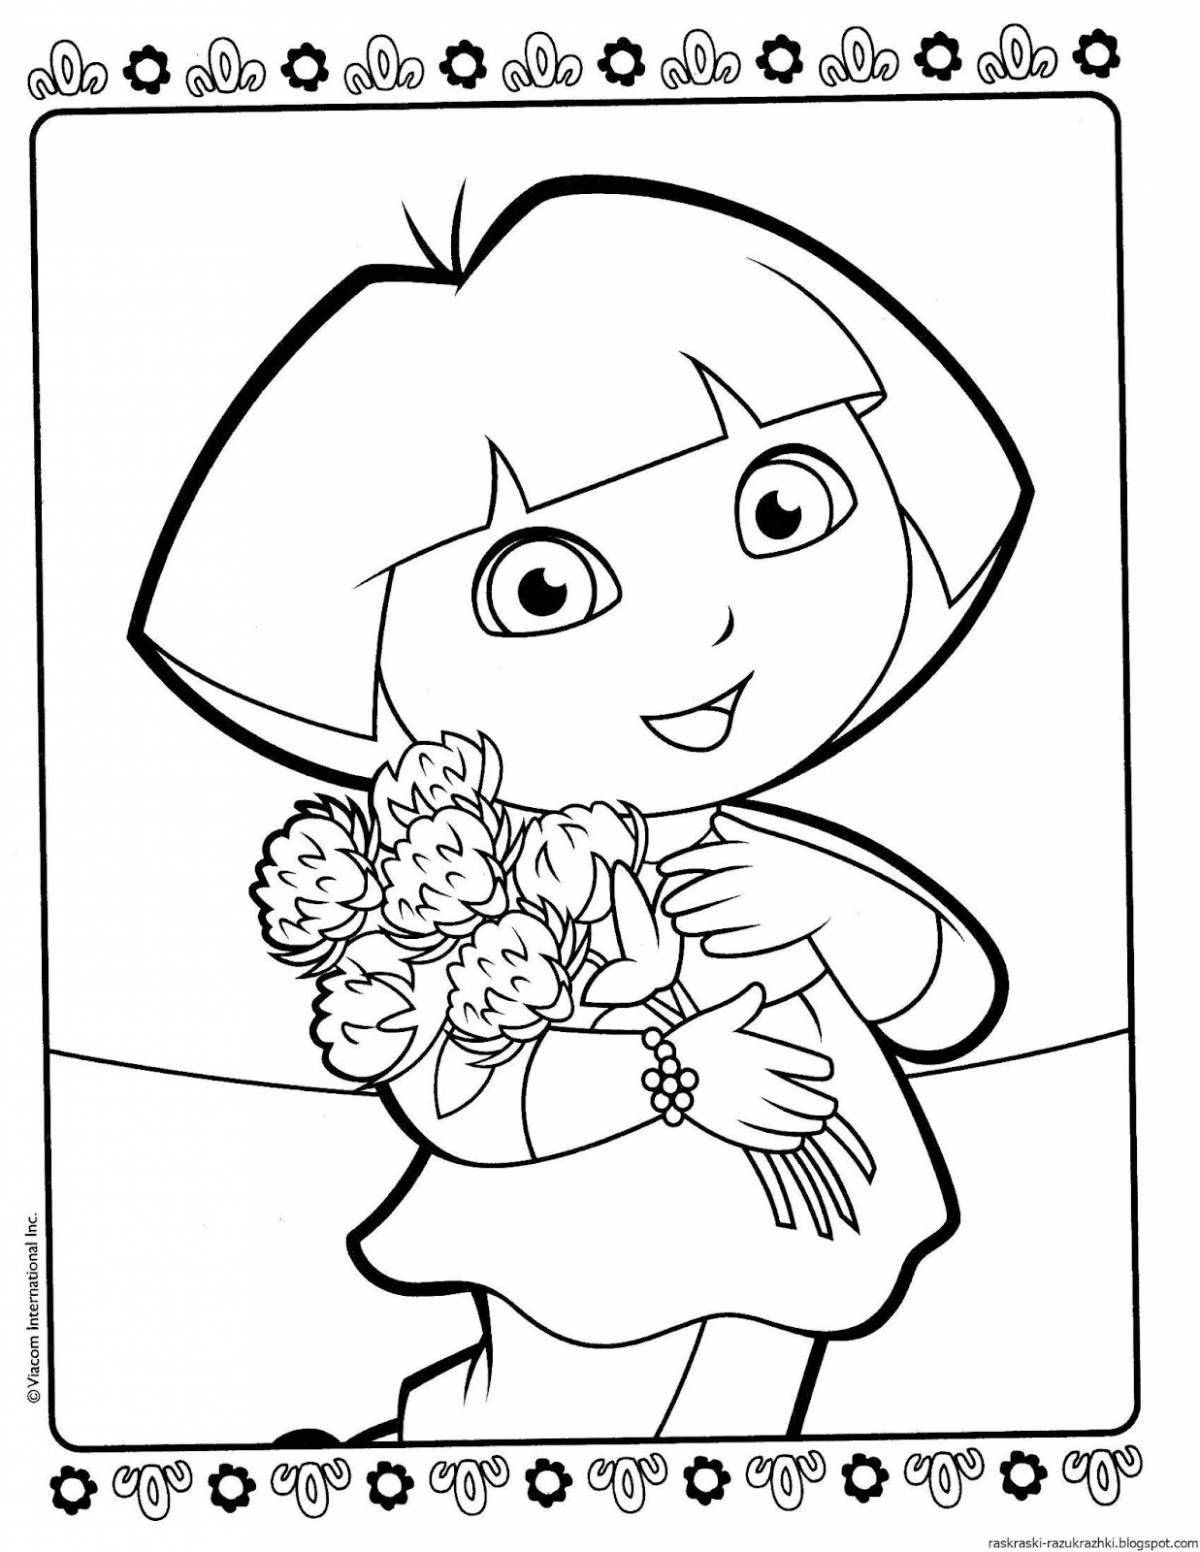 Awesome coloring pages blogspot com